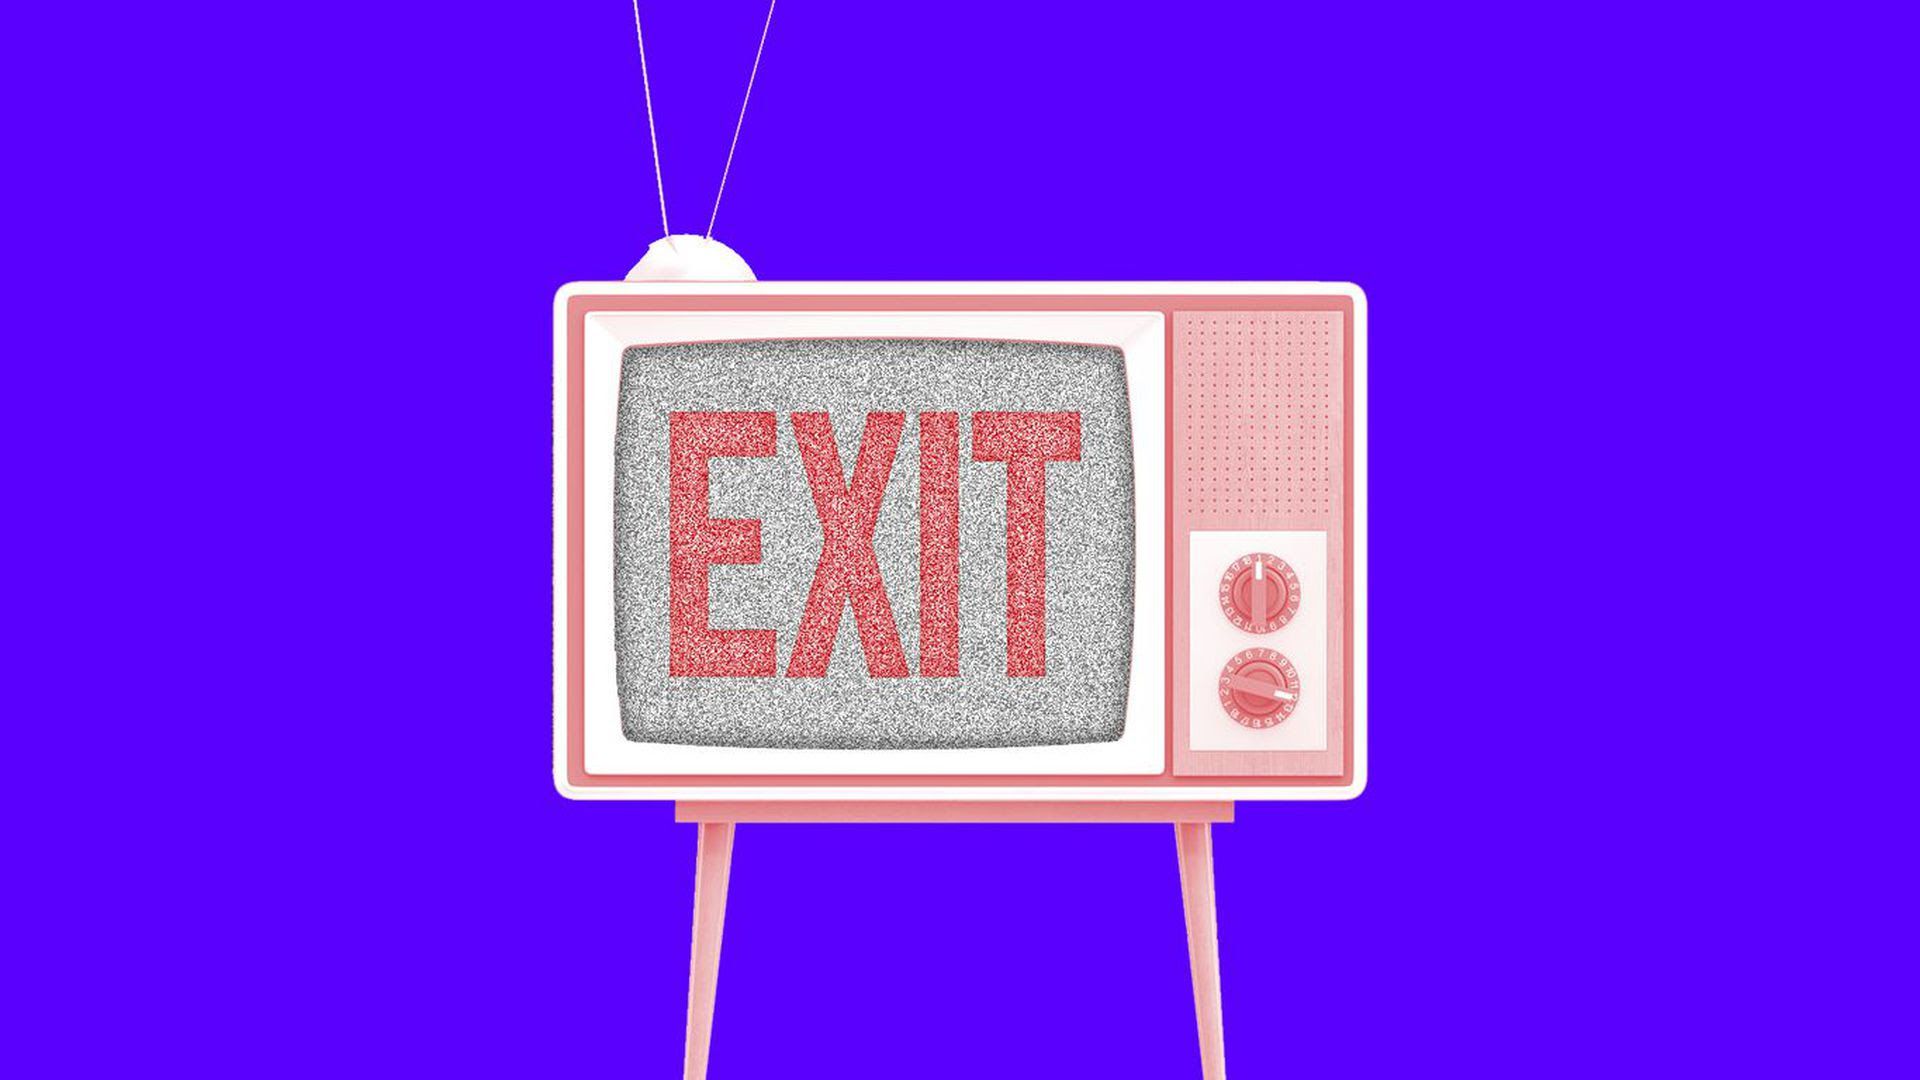 An illustration of a red television in front of a purple background that shows the exit symbol on its screen.